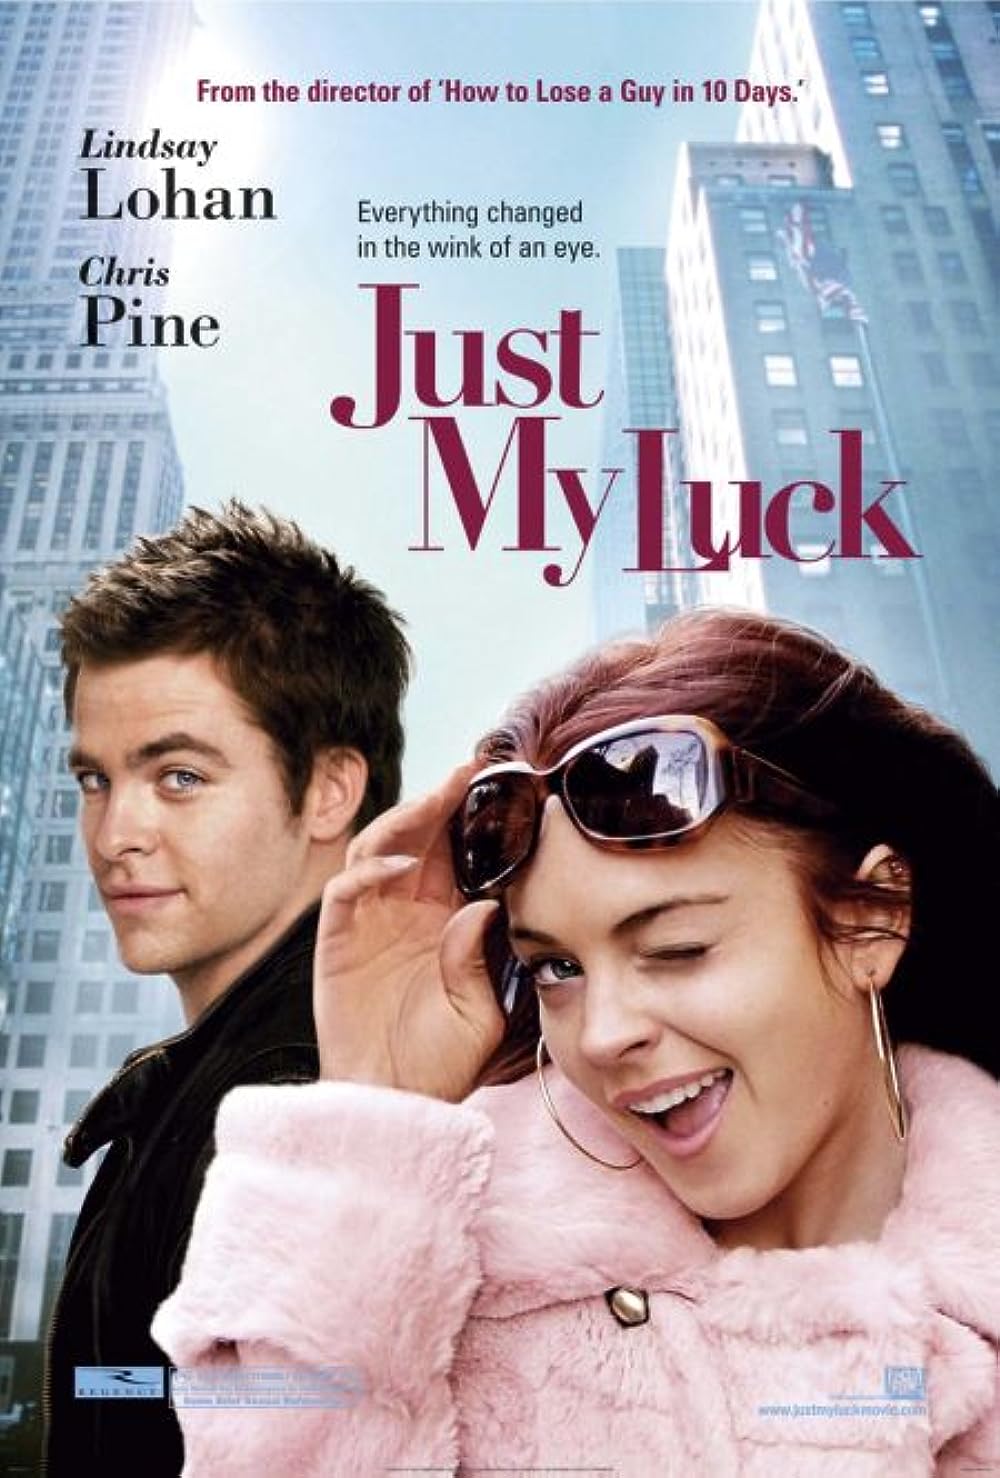 FULL MOVIE: Just My Luck (2006)